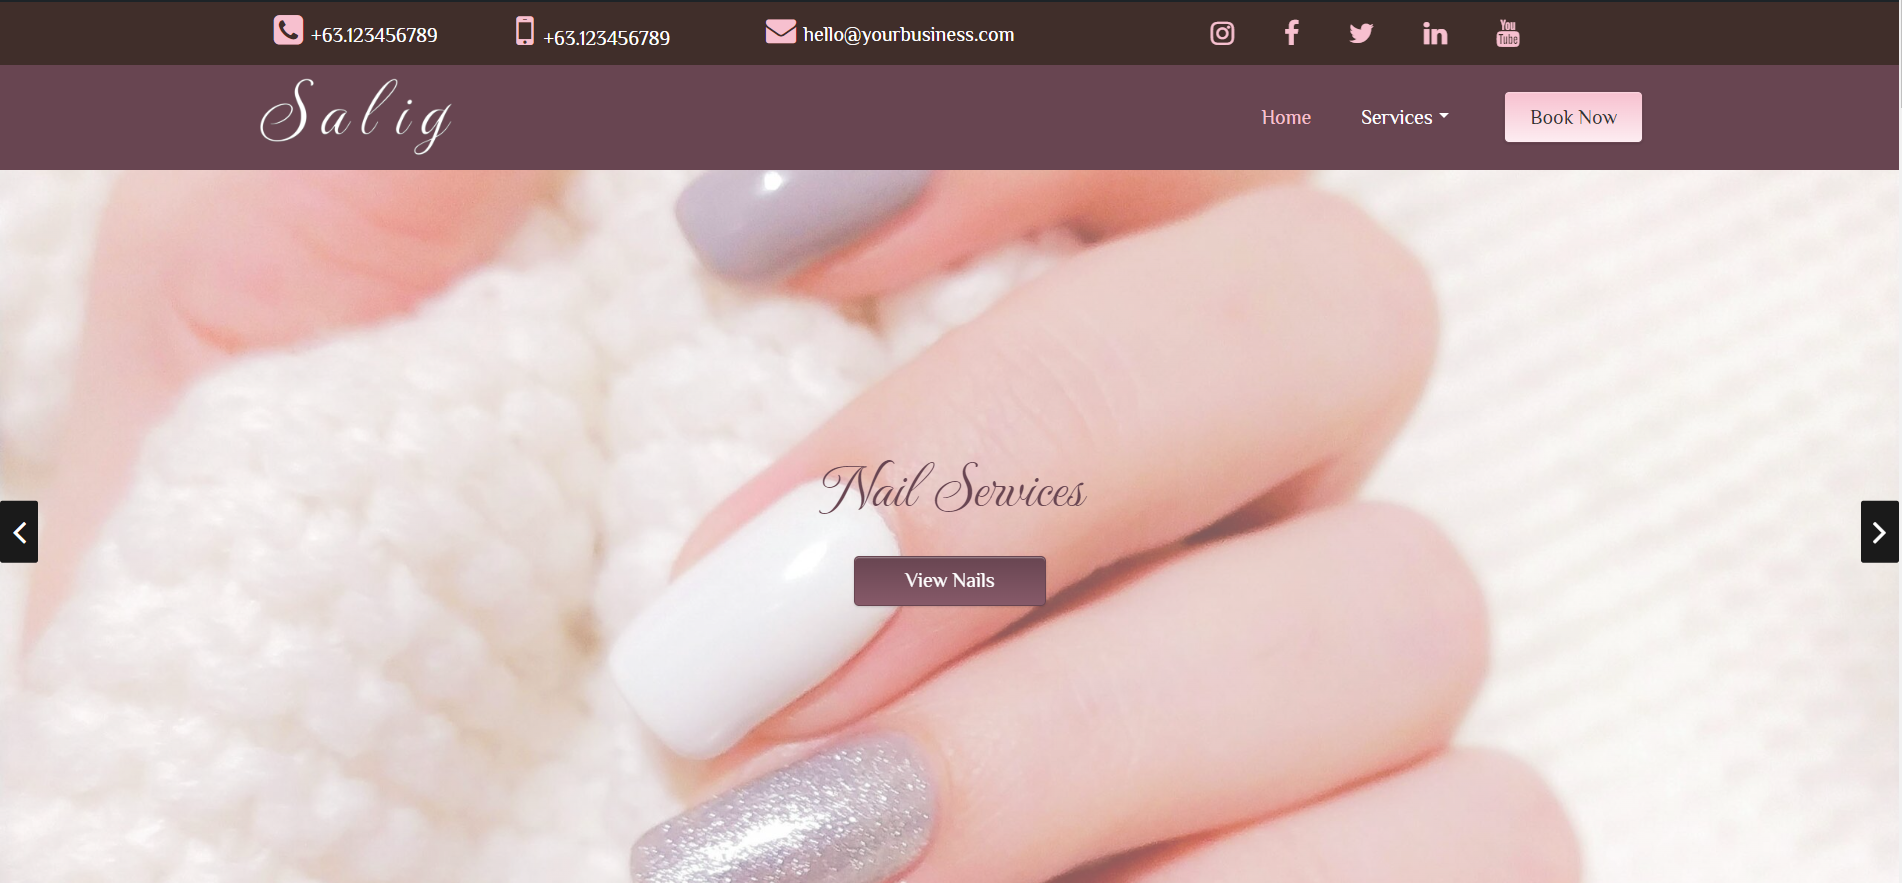 Salig Nail Salon WordPress theme - A sleek and modern design perfect for showcasing nail services and products.